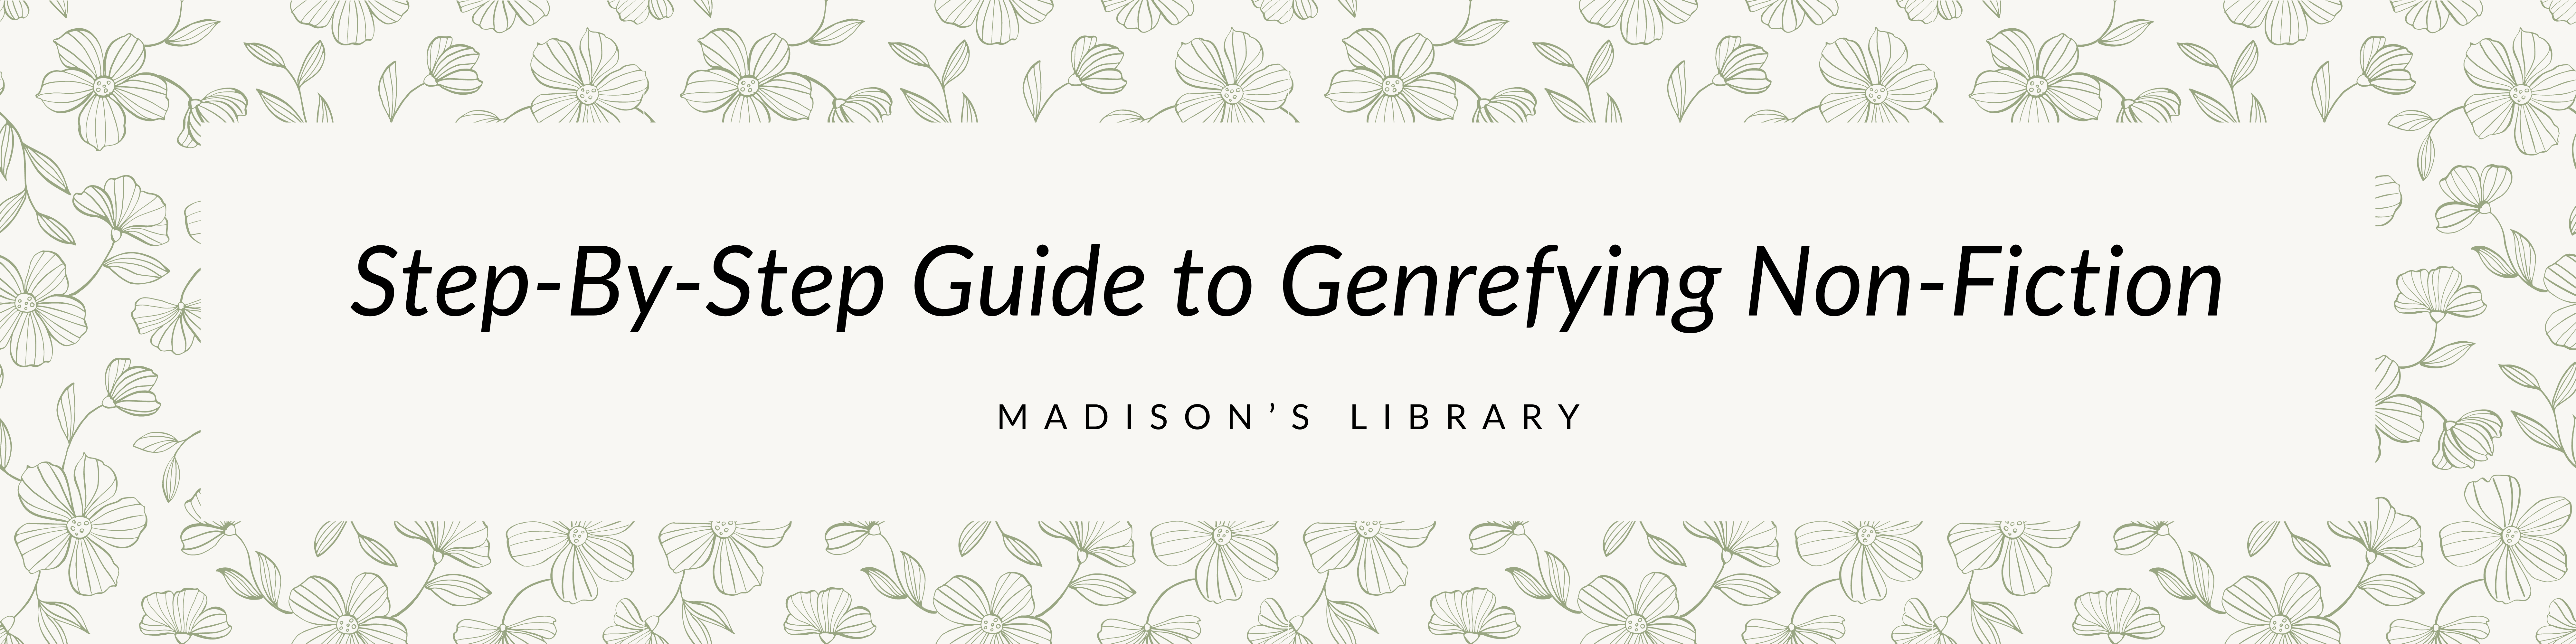 Step-by-step guide to genrefying non-fiction